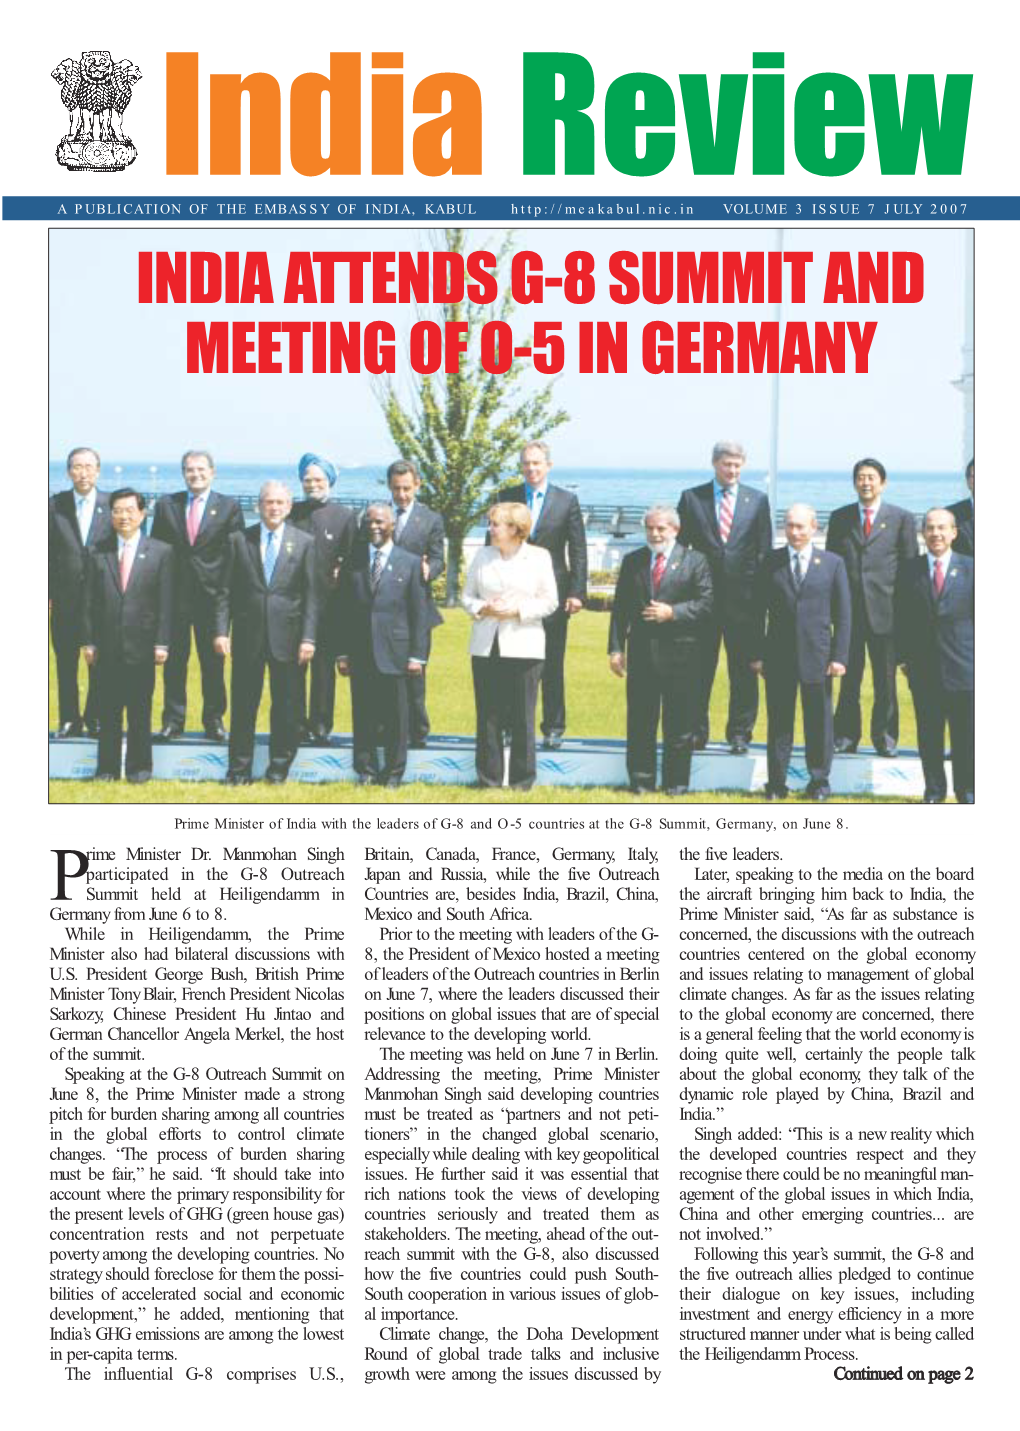 India Attends G-8 Summit and Meeting of O-5 in Germany